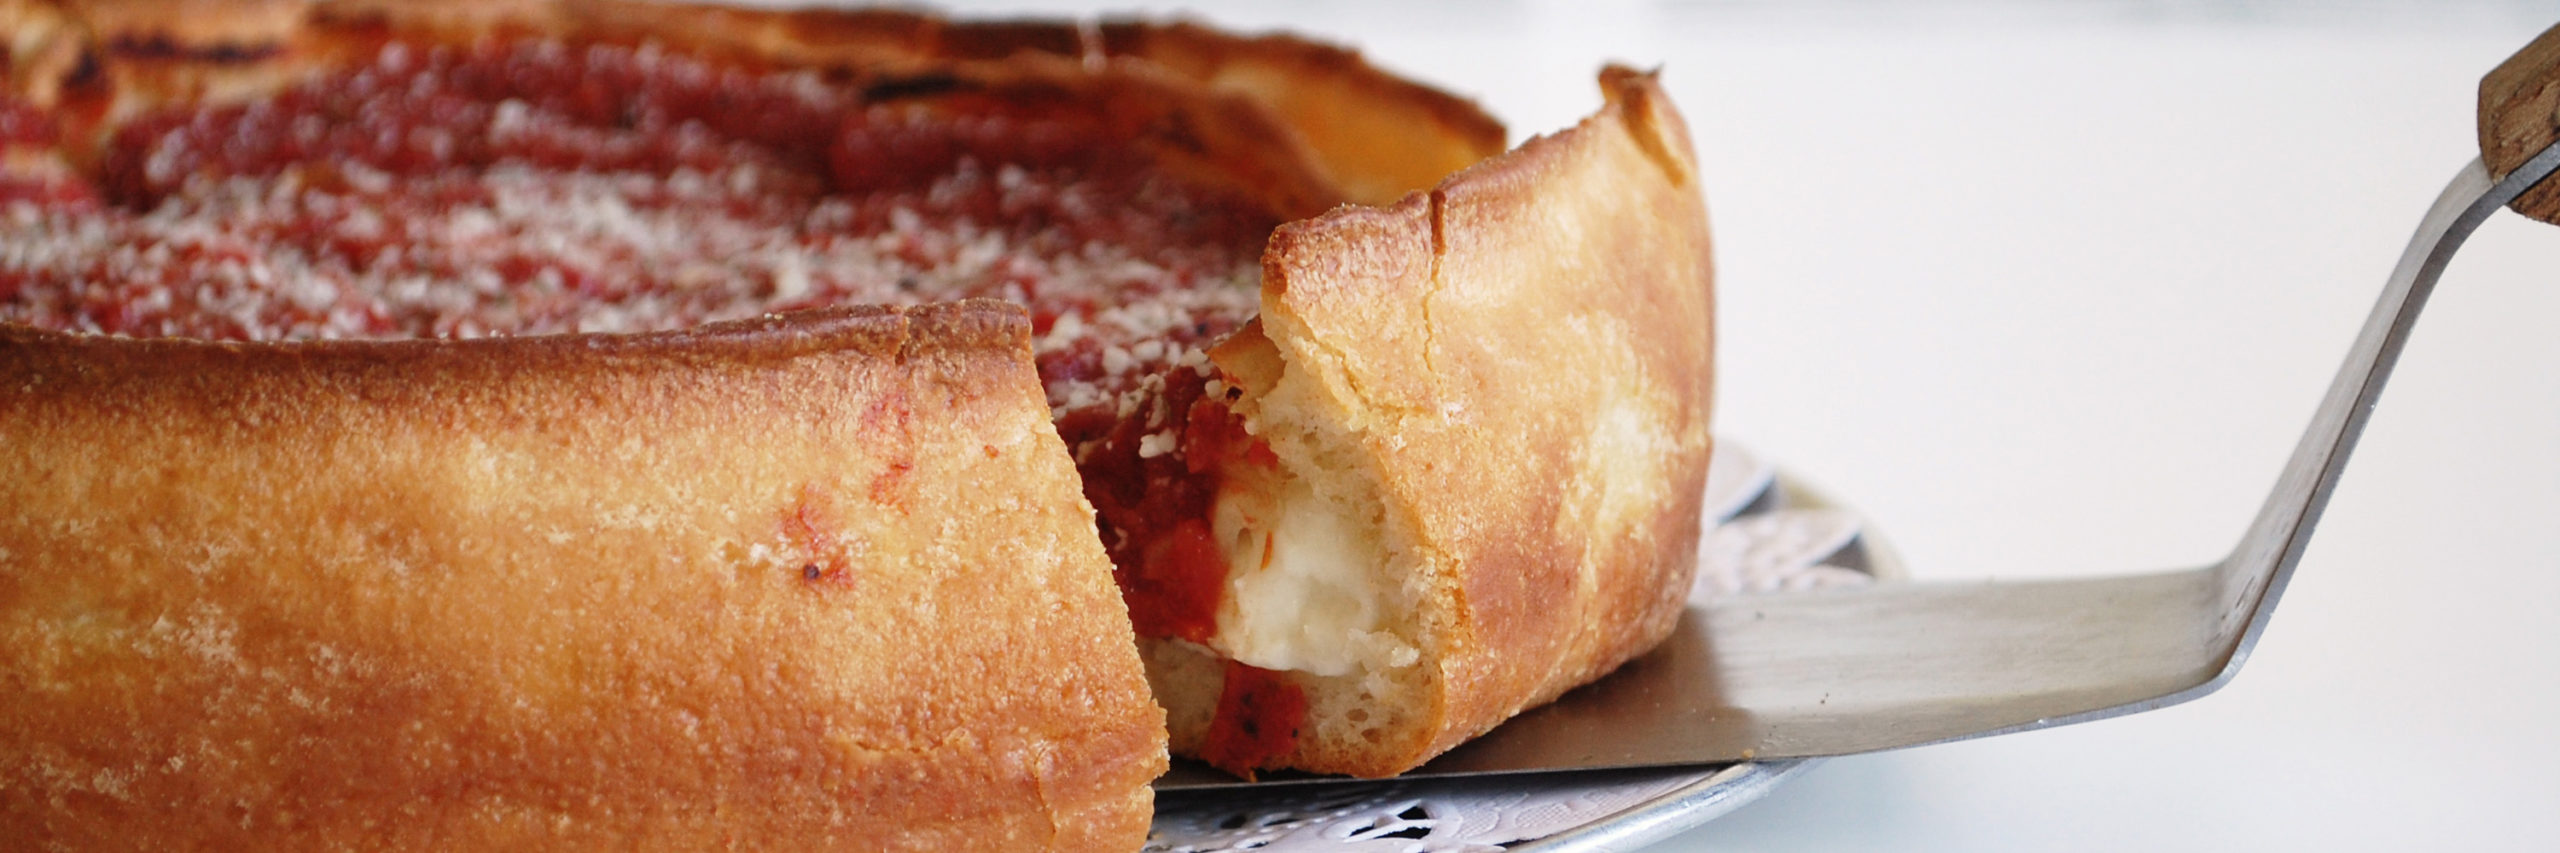 The Best Chicago Pizza - Nancy's Stuffed Pizza